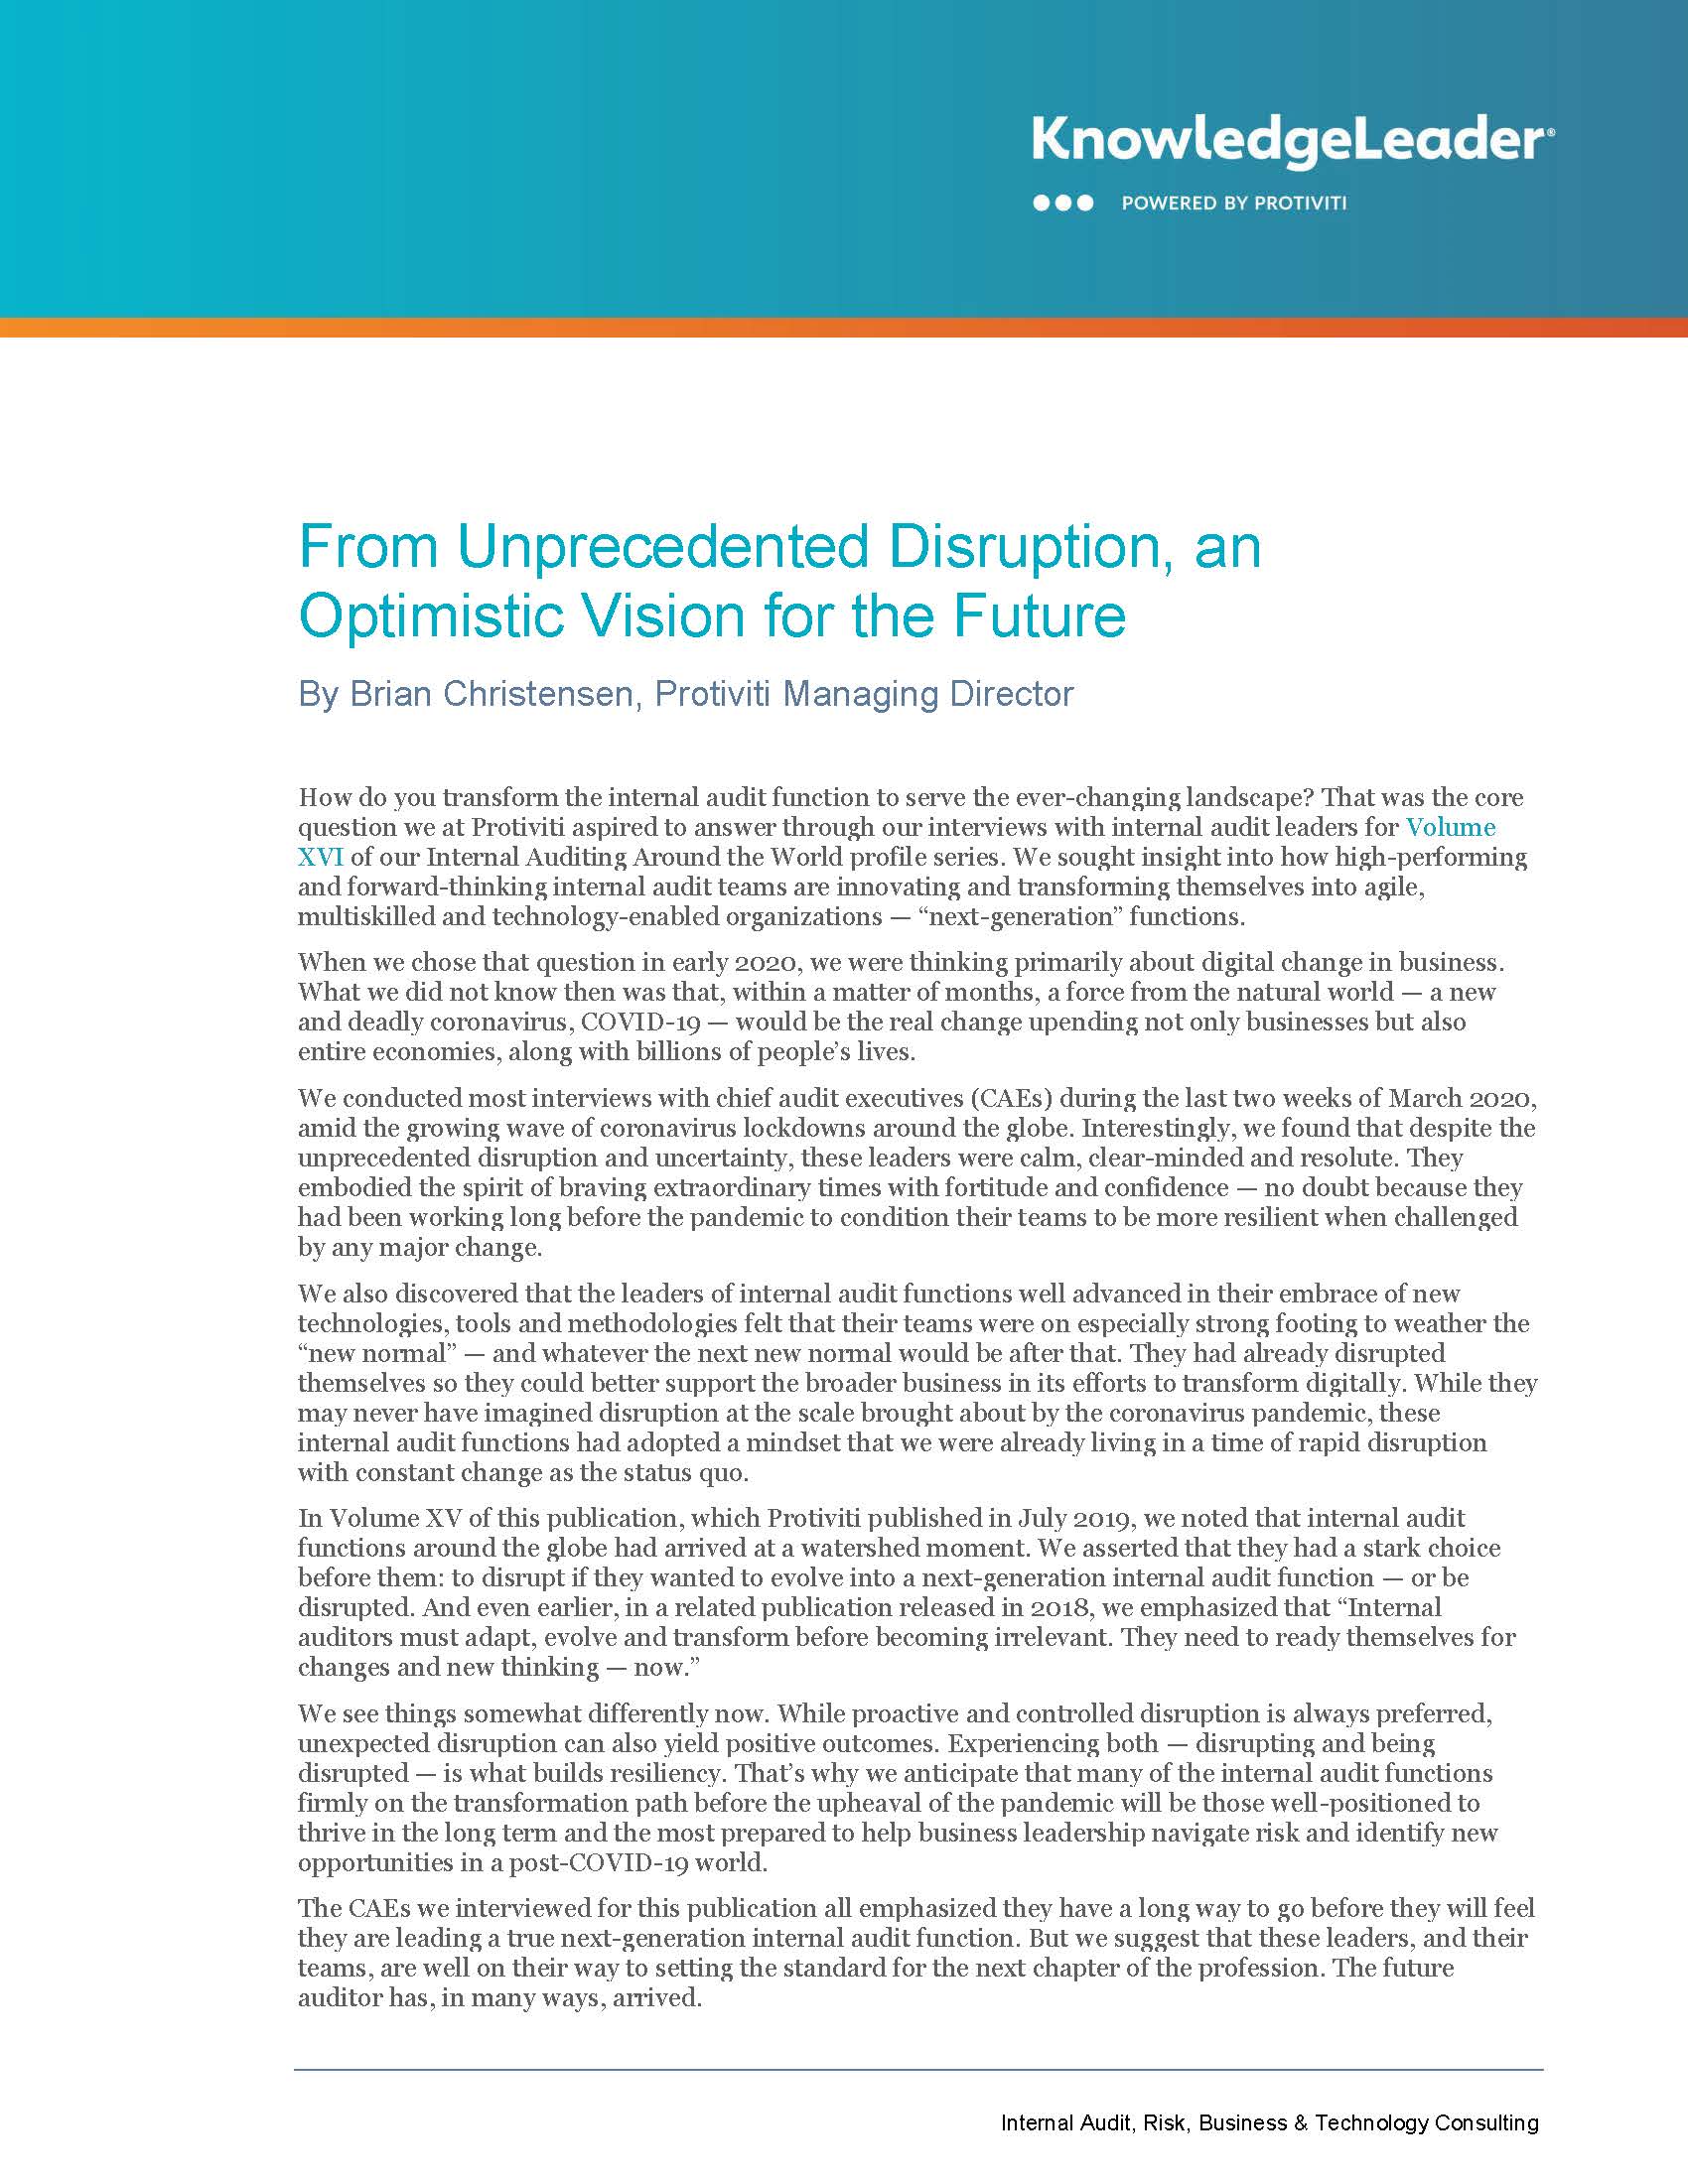 Screenshot of the first page of From Unprecedented Disruption, an Optimistic Vision for the Future